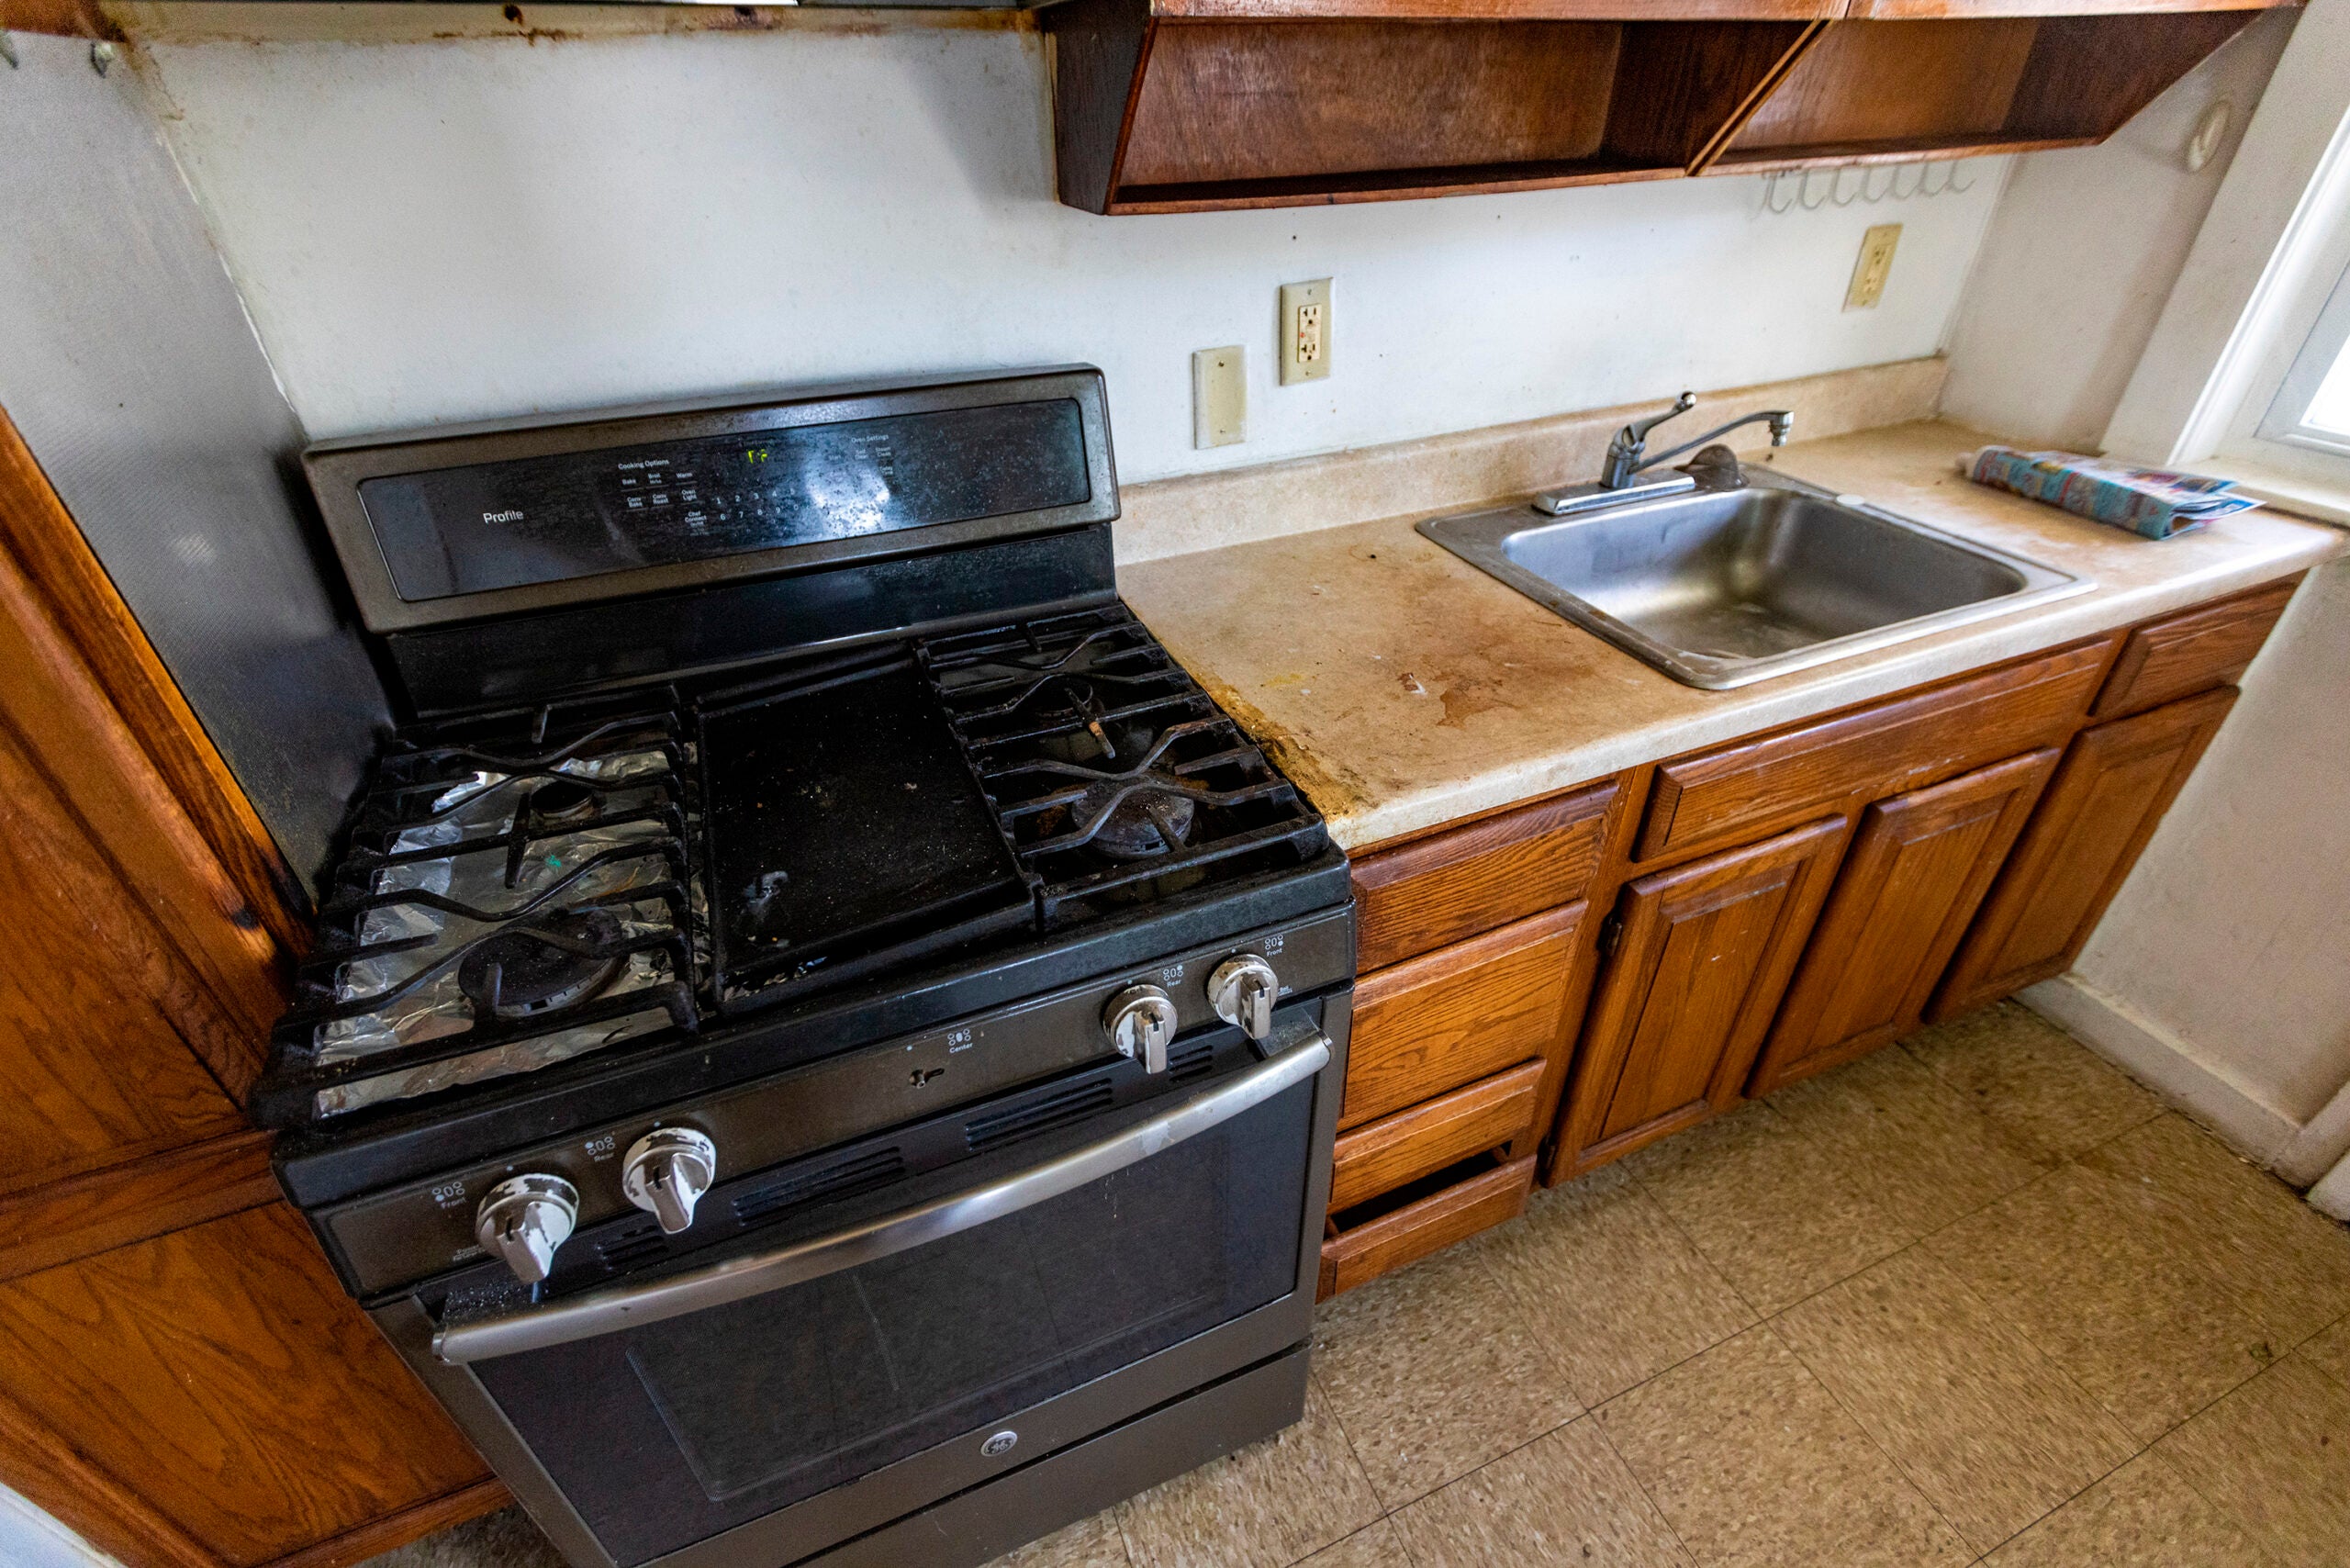 A kitchen in need renovation is seen at the Lexington Gardens public housing complex in Watertown, Mass.